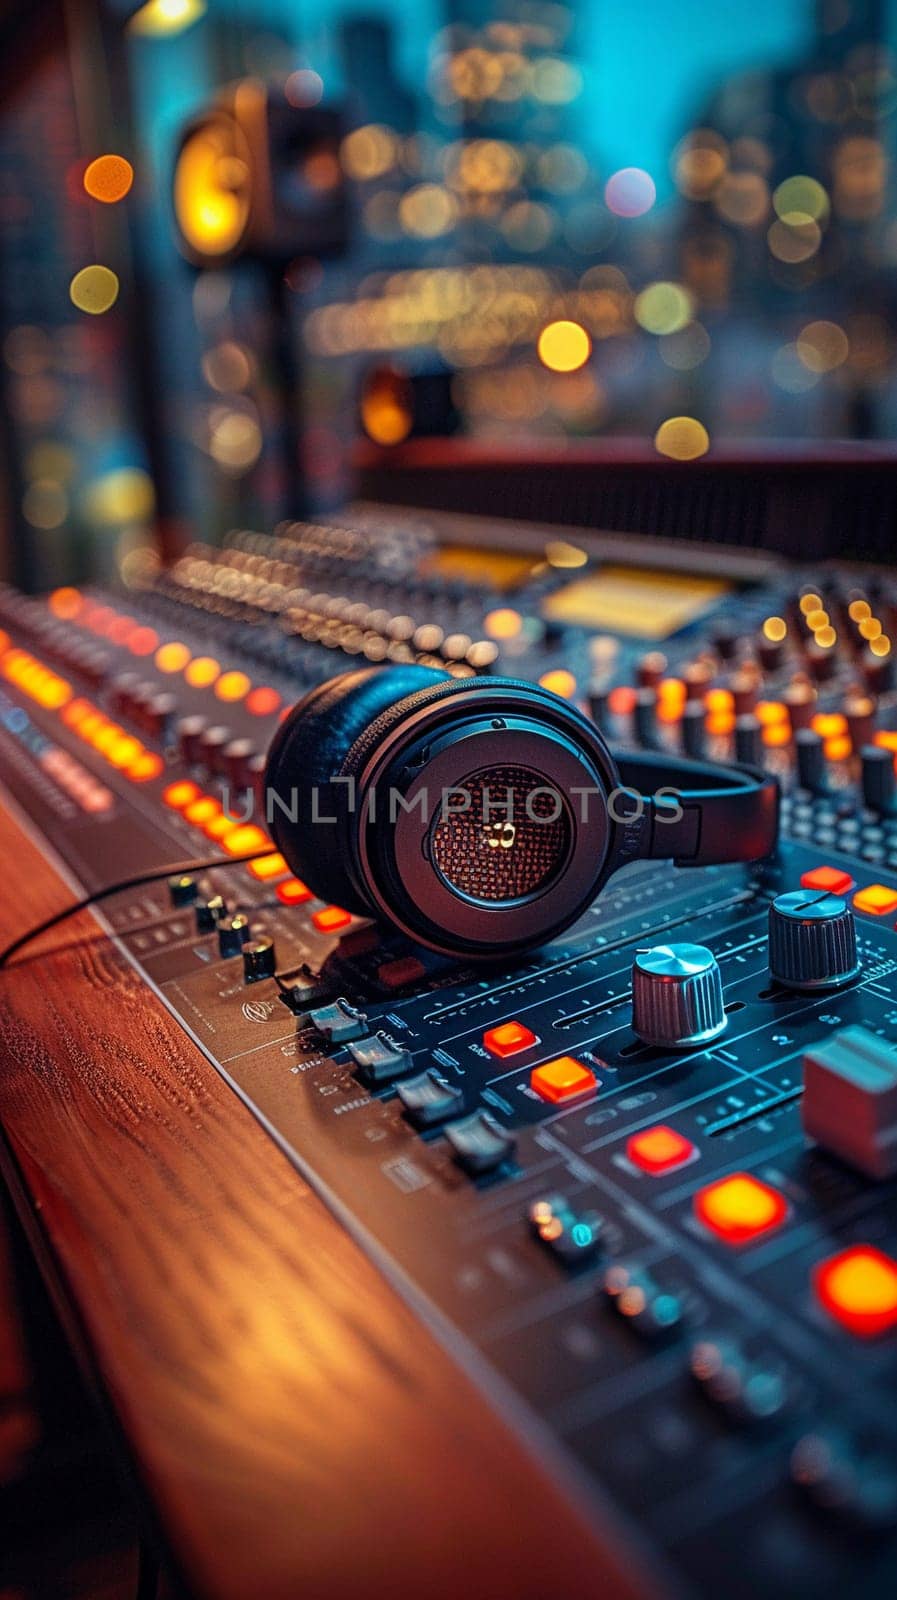 Recording Studio Captures the Harmony of Sound in Business of Music Production, Mixing consoles and headphone sets record a story of rhythm and harmony in the music production business.